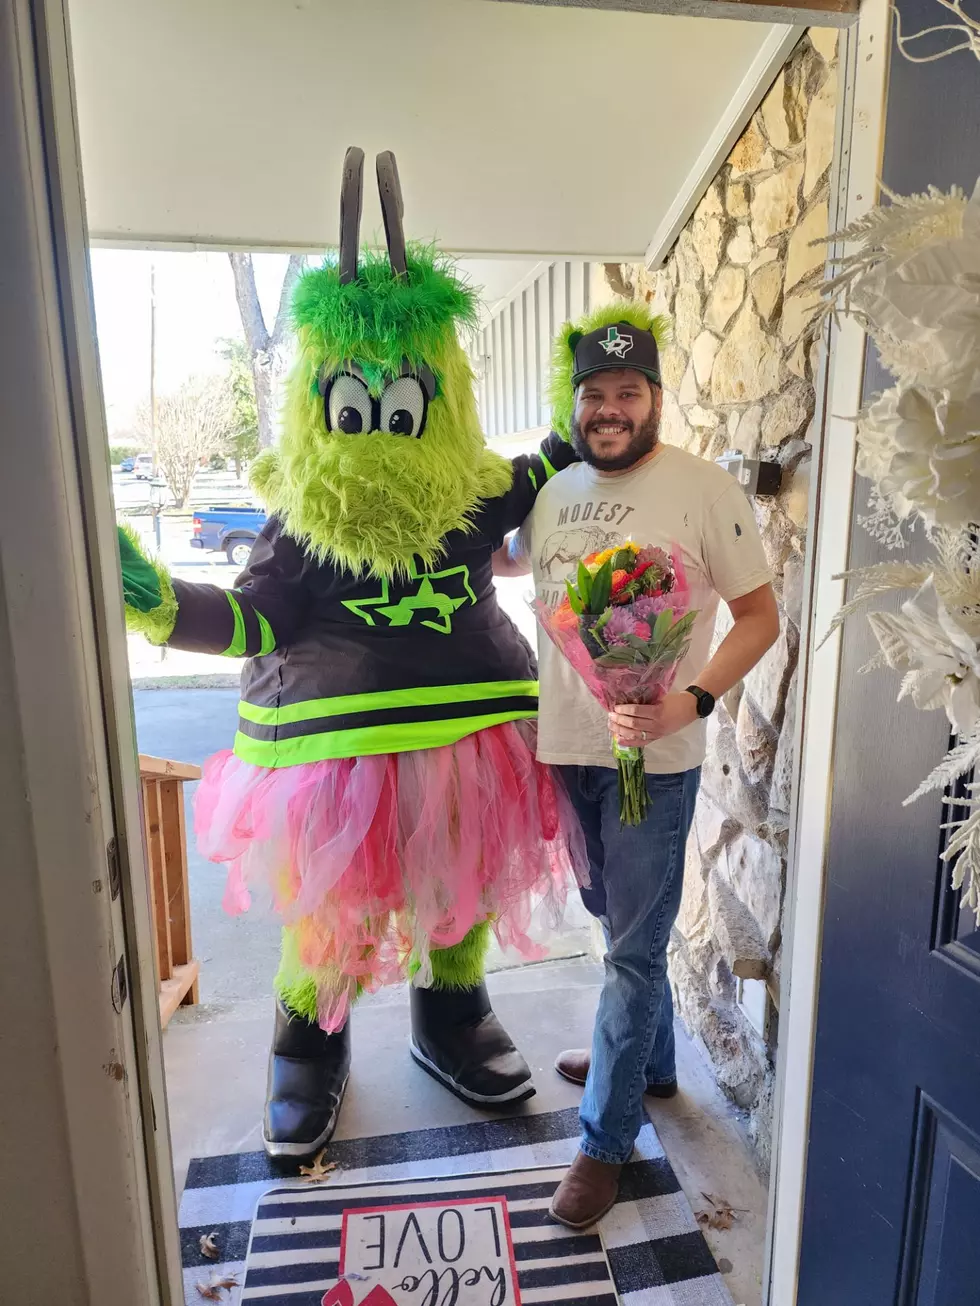 I Sent My Old Roommate the Dallas Stars Mascot for Valentine’s Day [VIDEO]